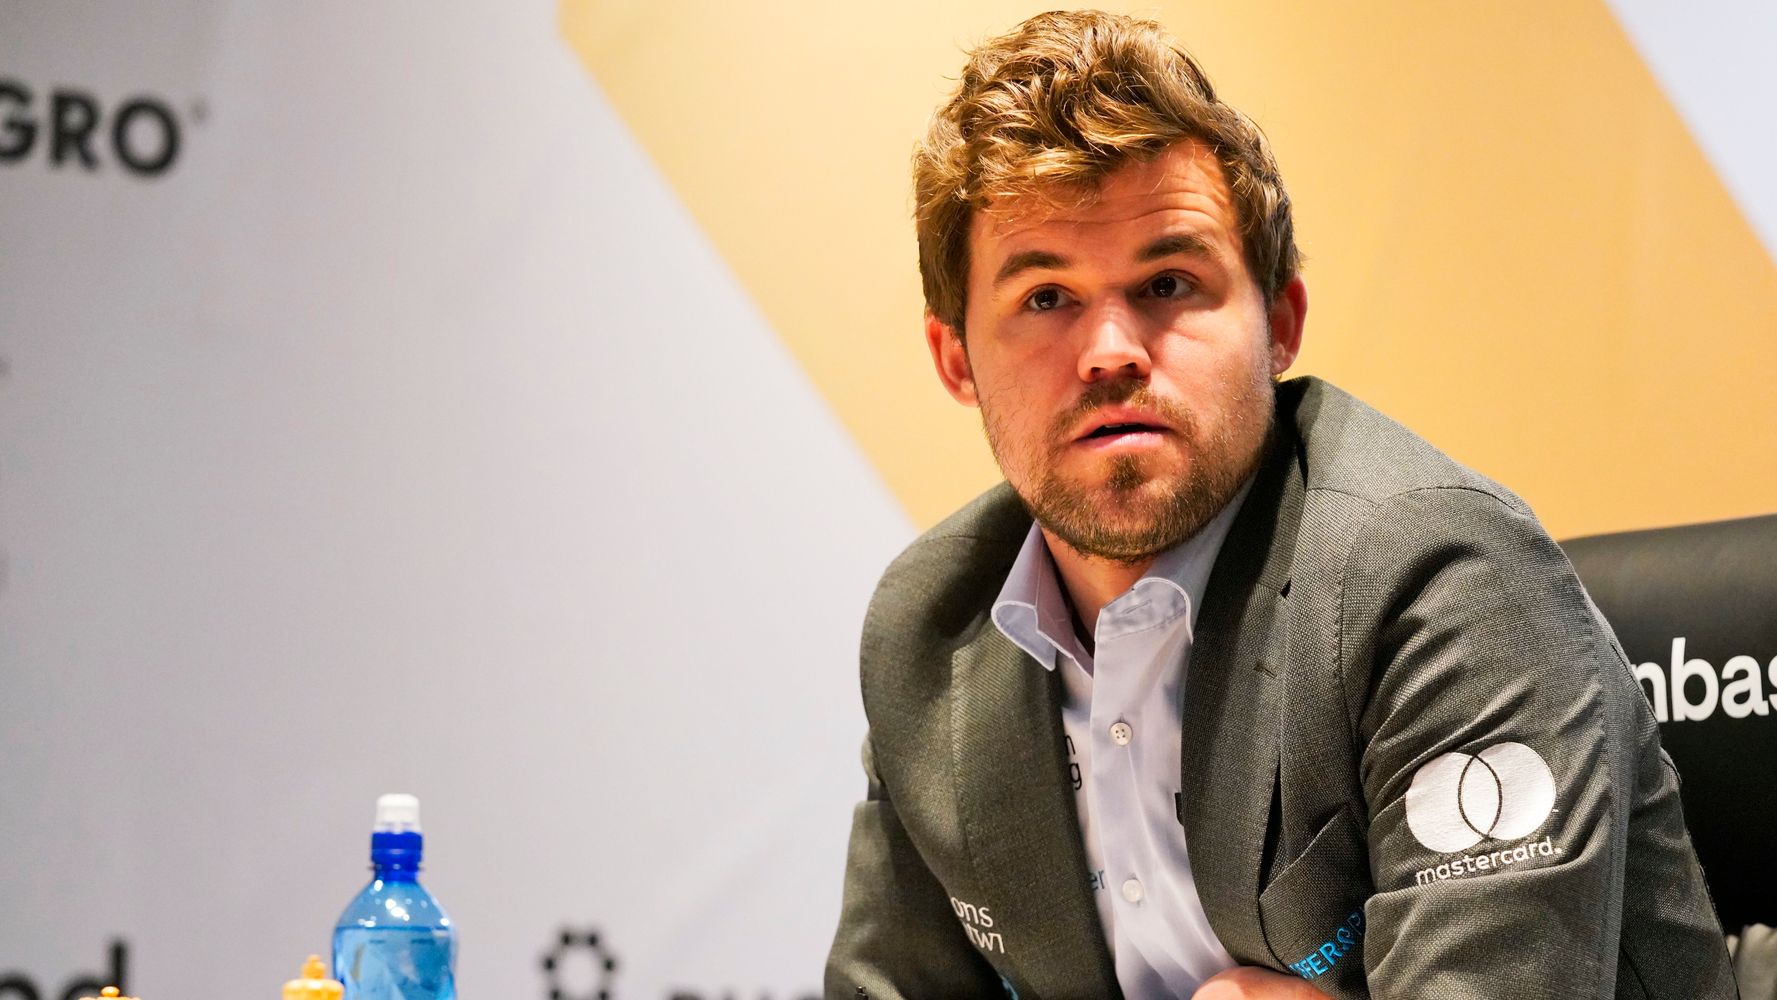 Chess: Carlsen outwits teenagers at World Cup as Russians fail